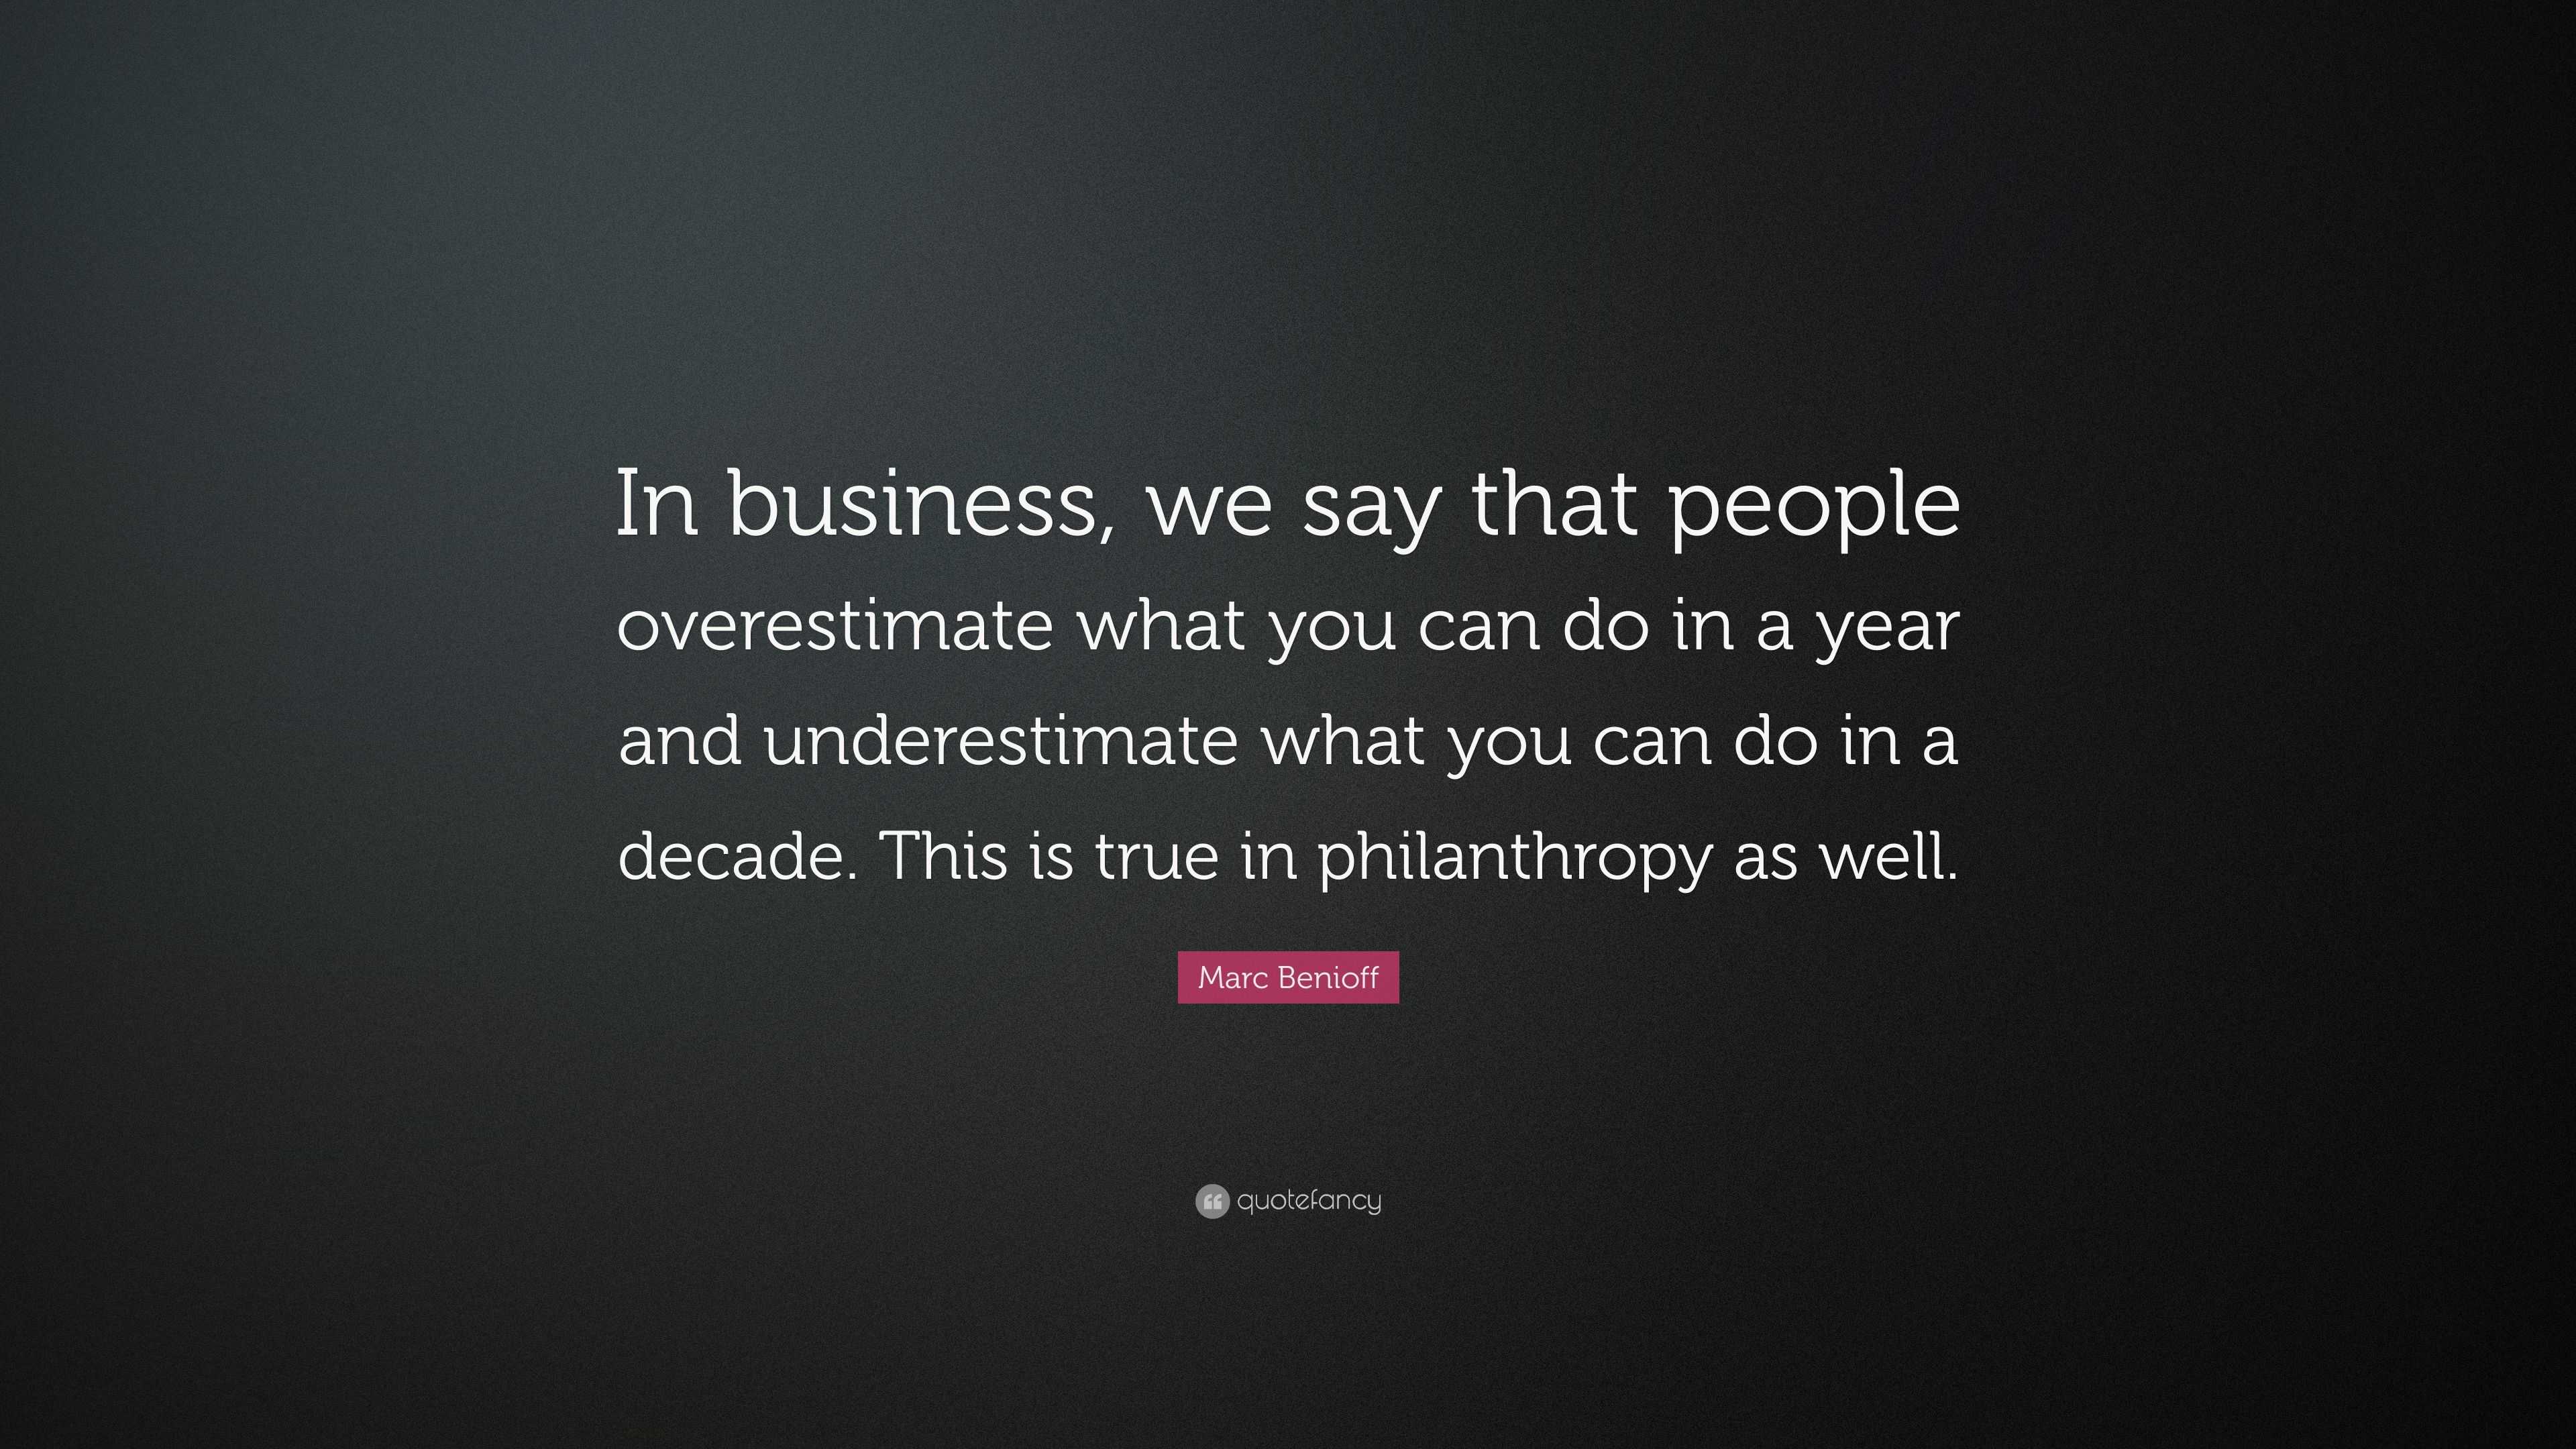 Marc Benioff Quote: “In business, we say that people overestimate what ...